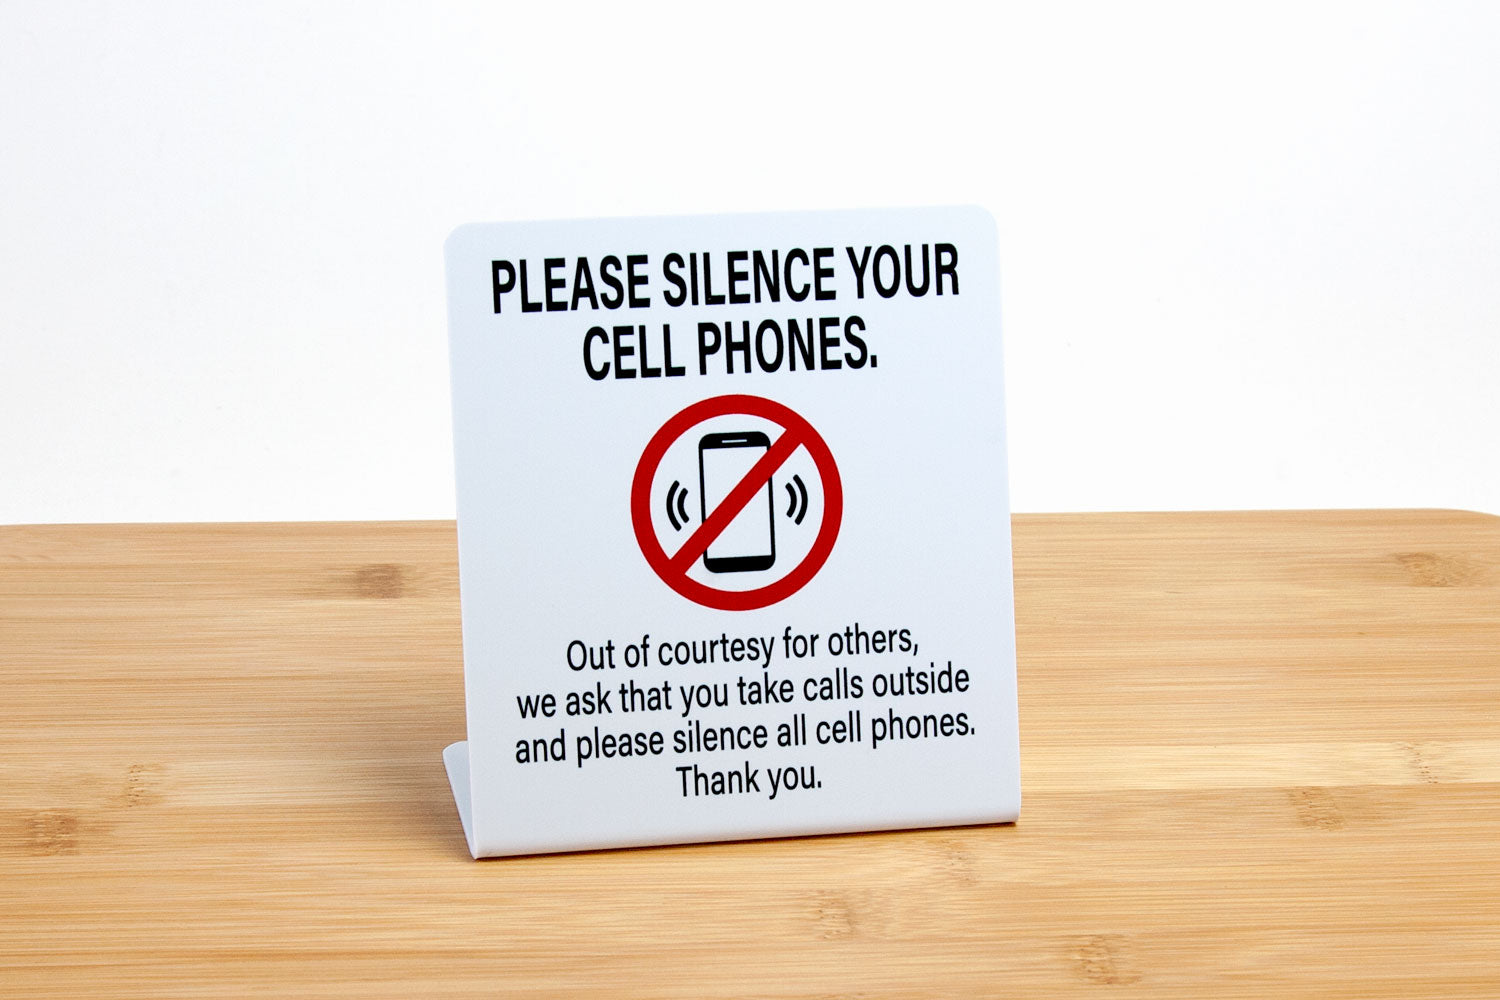 Silence cell phone signs provide a polite reminder to please silence cell phones and take calls outside. These L style signs are easy to display on counters, desks and tables.